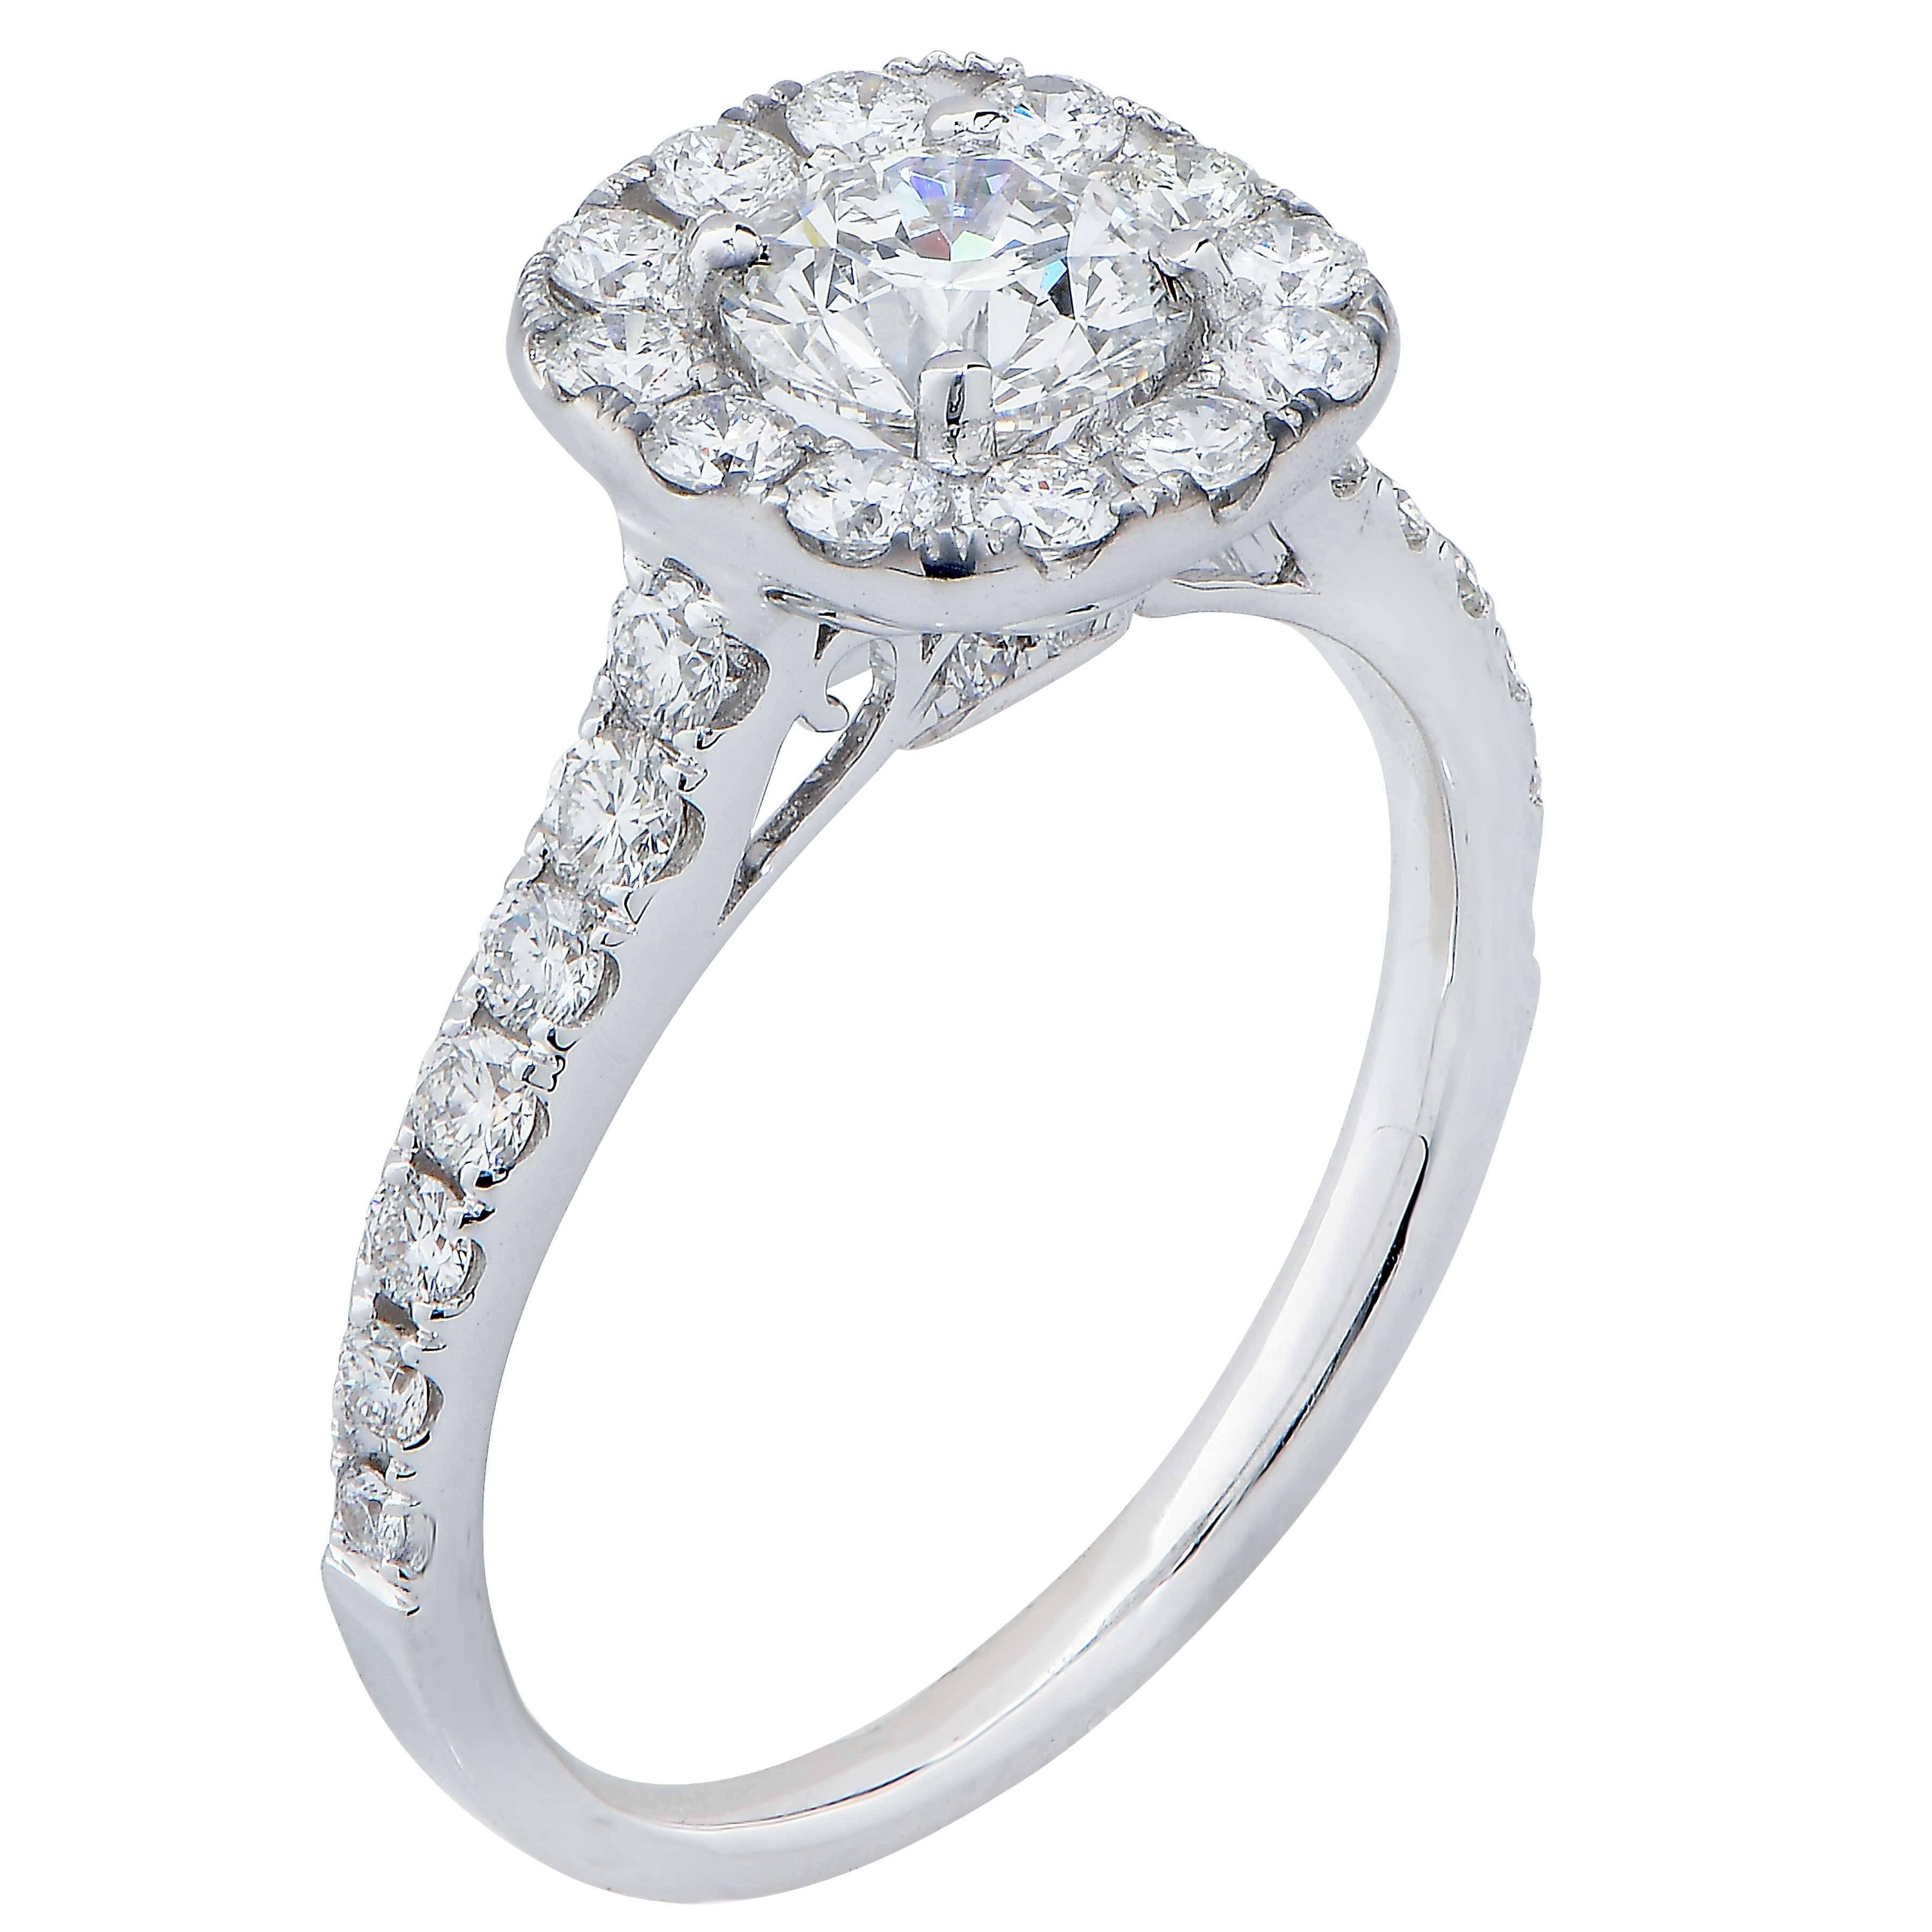 Modern design diamond engagement ring features a round brilliant cut GIA Graded E color VS2 clarity surrounded by 30 round brilliant cut diamonds with a total weight of .78 carat set in 18 Karat White Gold.
Ring Size: 6 1/2 (can be sized)
Metal